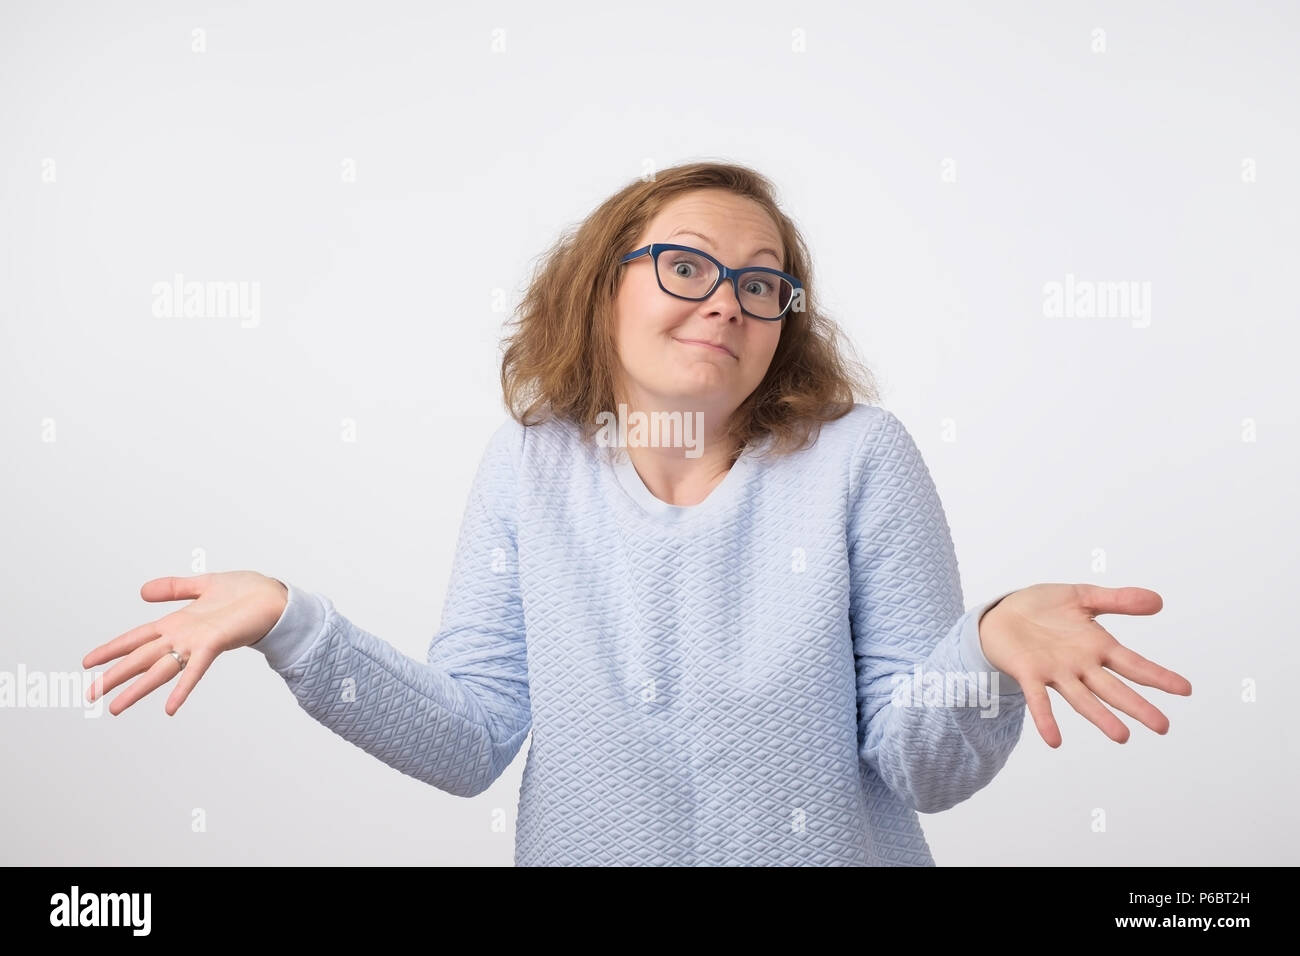 Shrugging norwegian woman wearing blue sweater in doubt doing shrug. Confused girl gesturing do not know sign on gray background Stock Photo